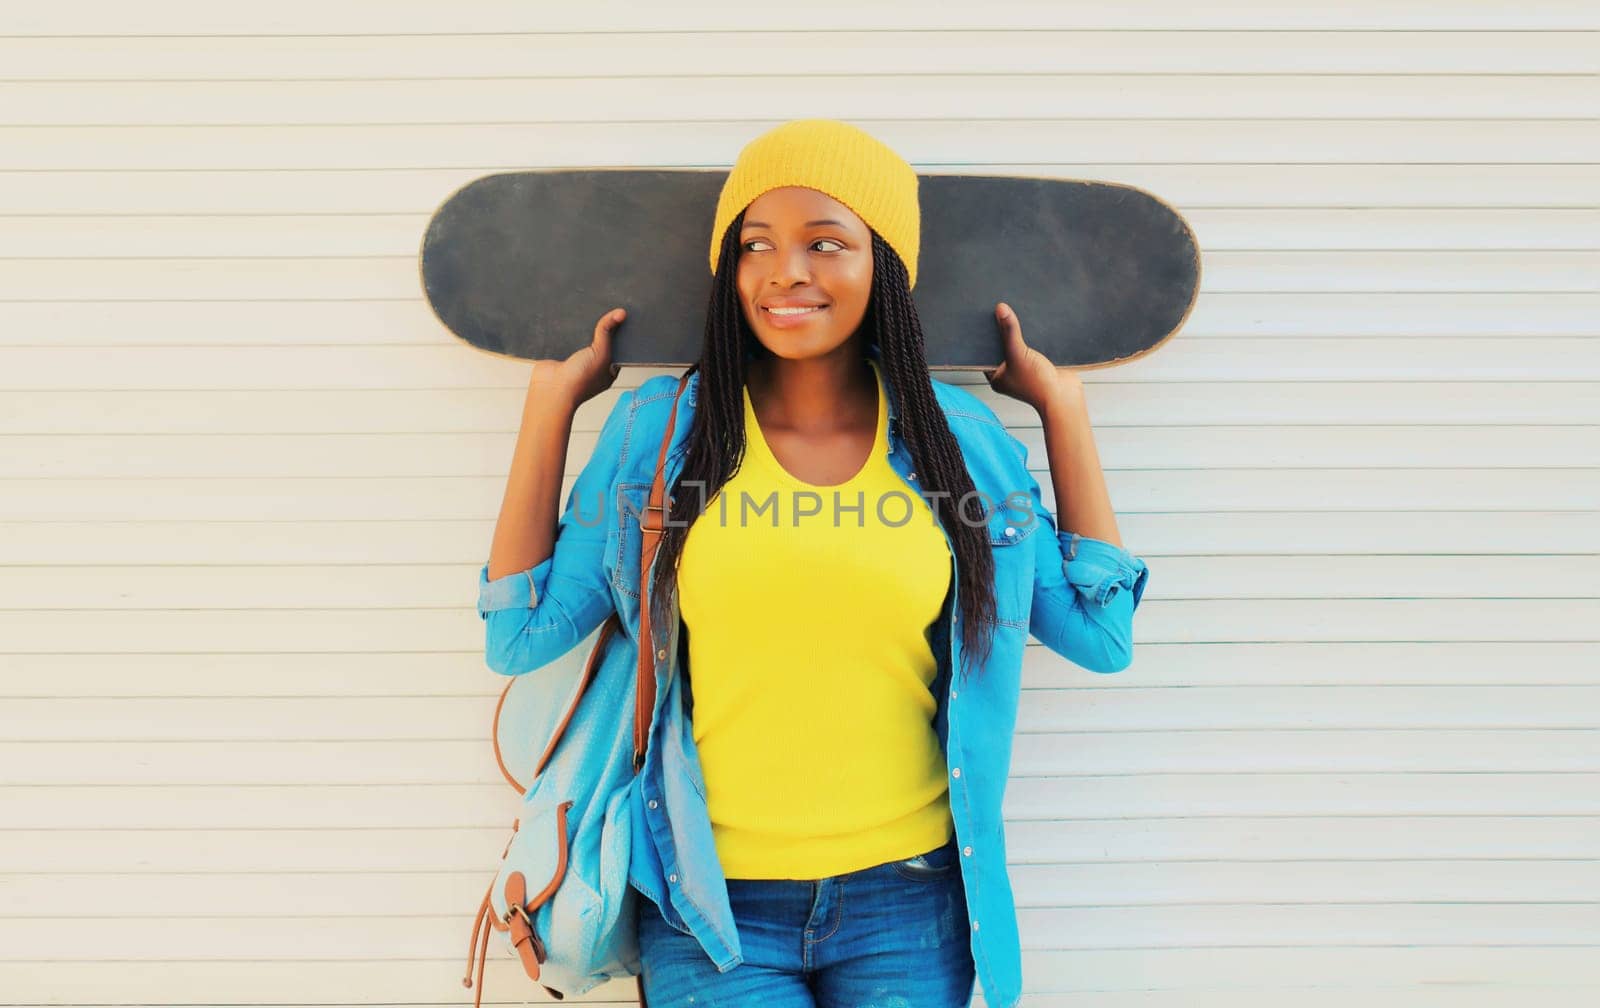 Portrait of happy smiling young african woman model posing with skateboard in the city